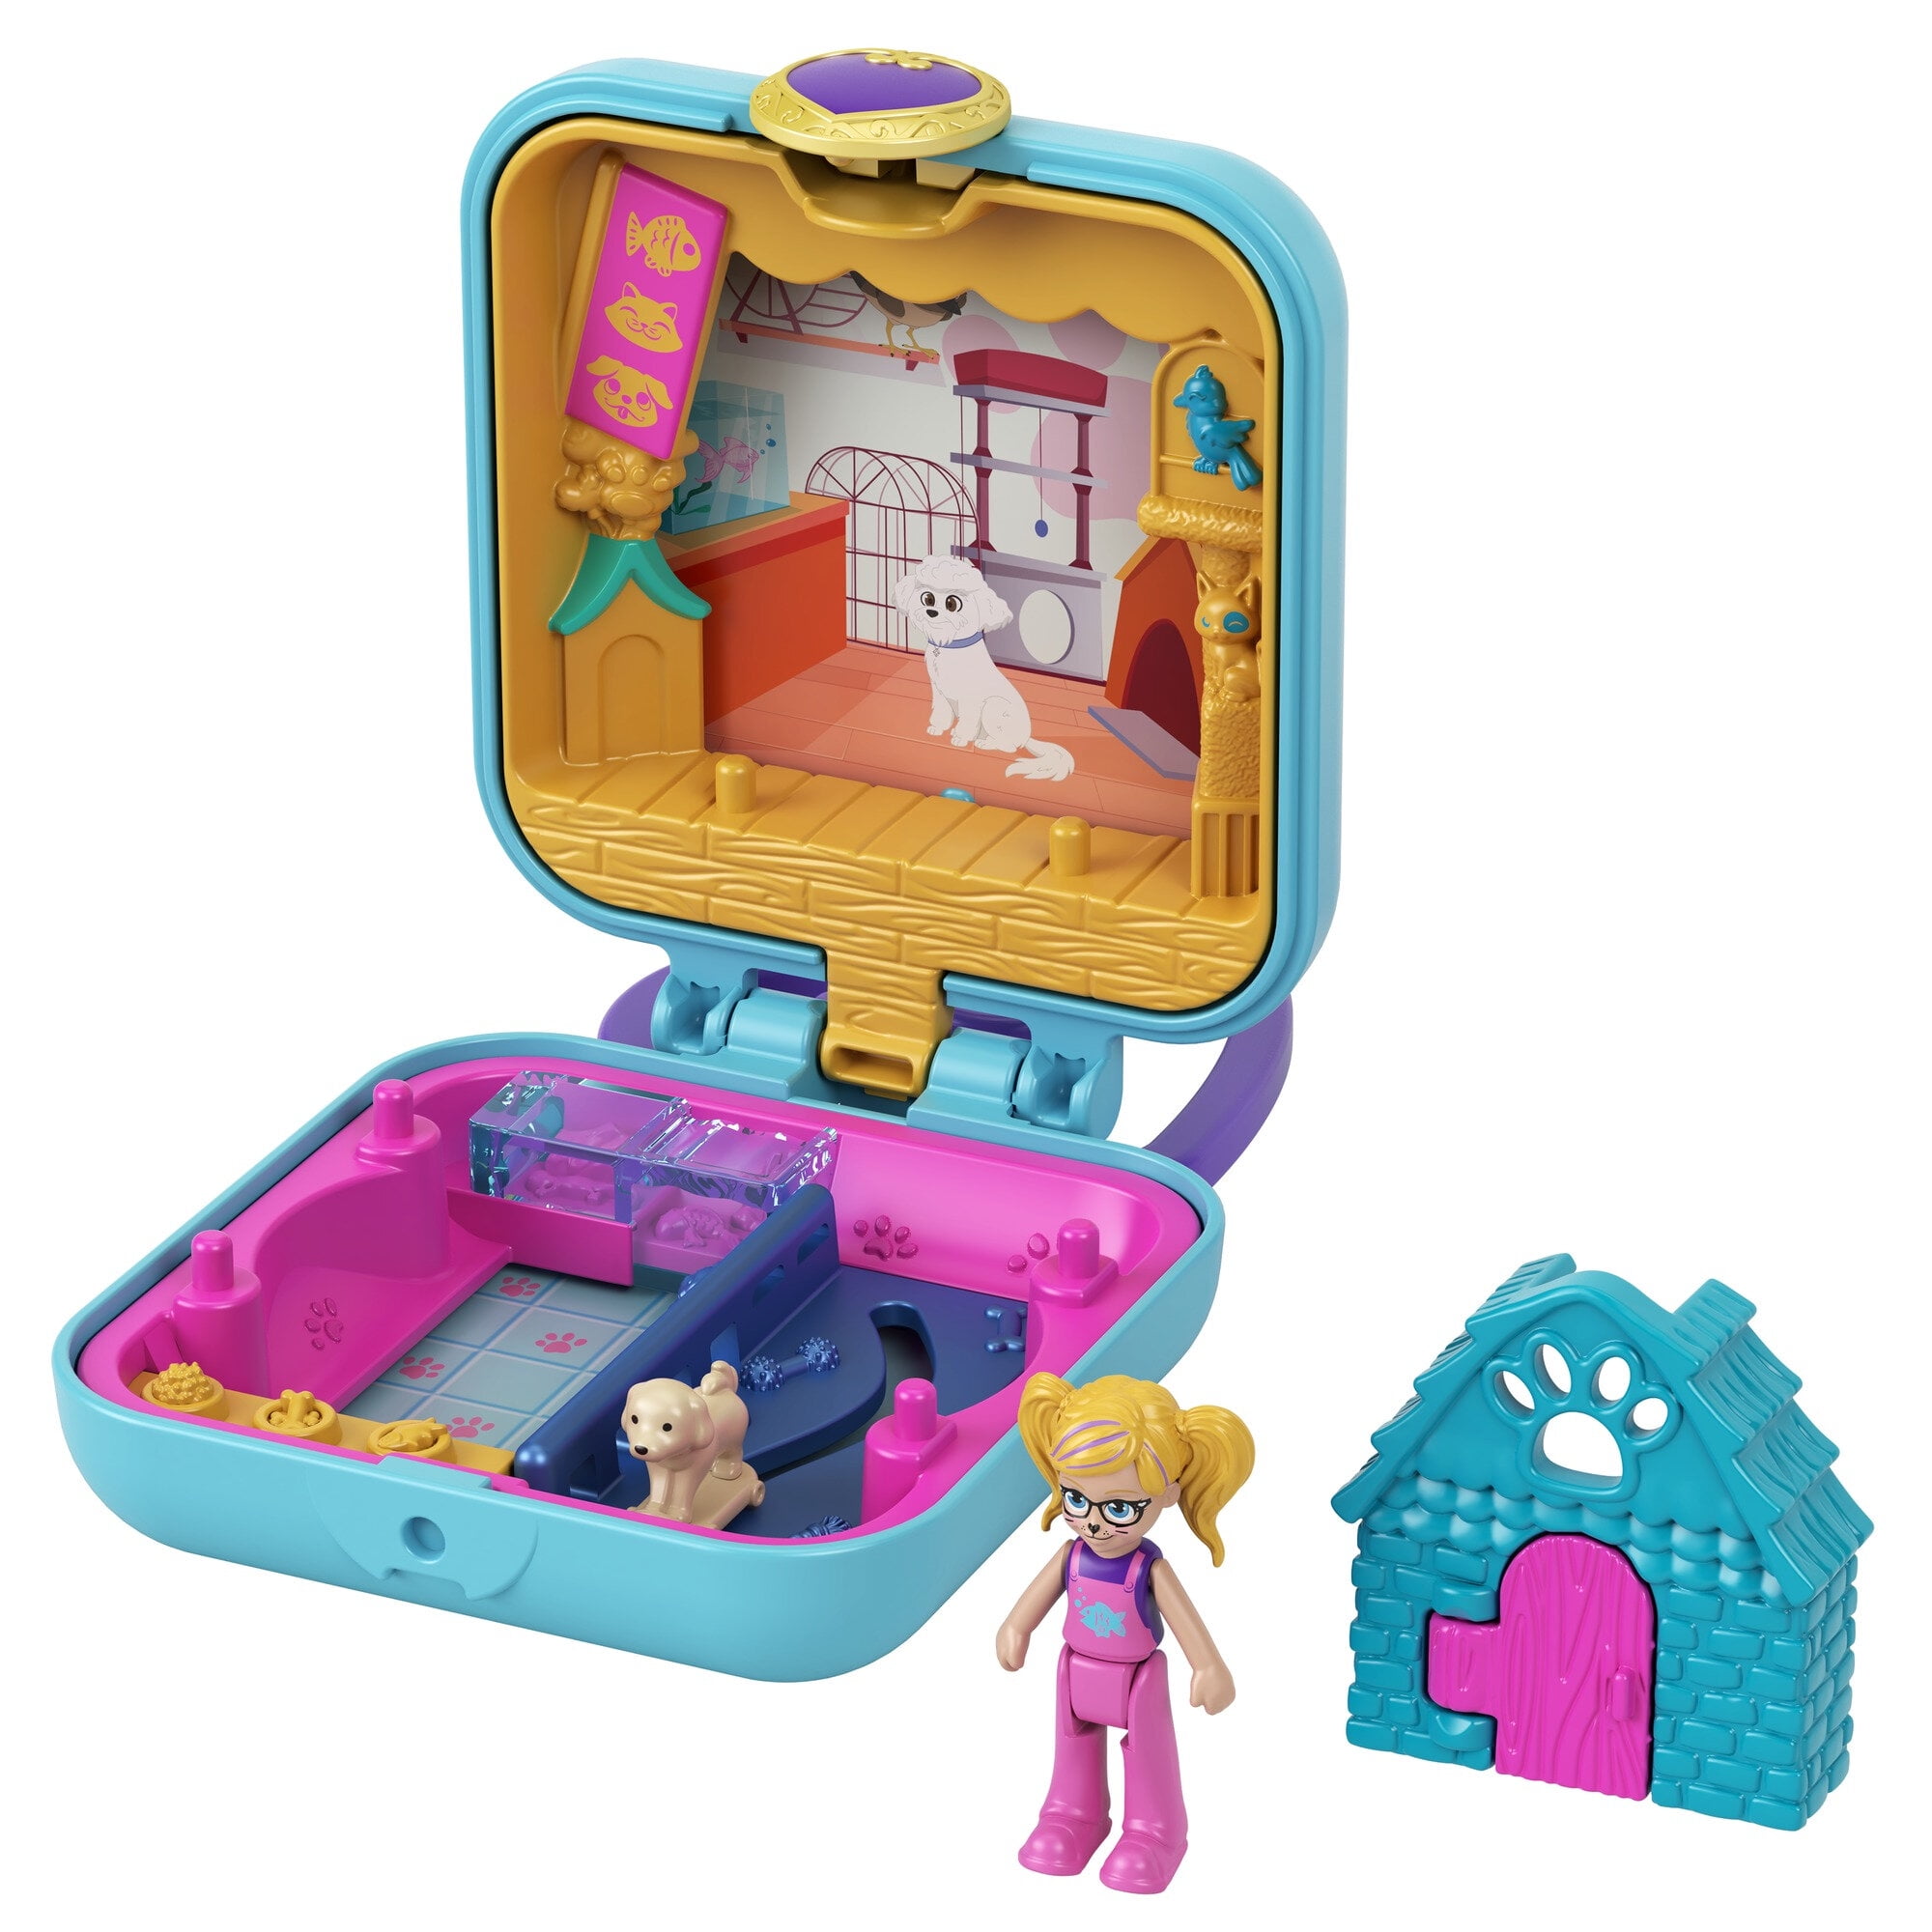 POLLY POCKET Surprise Easter Egg Mystery Figure & Outfit 